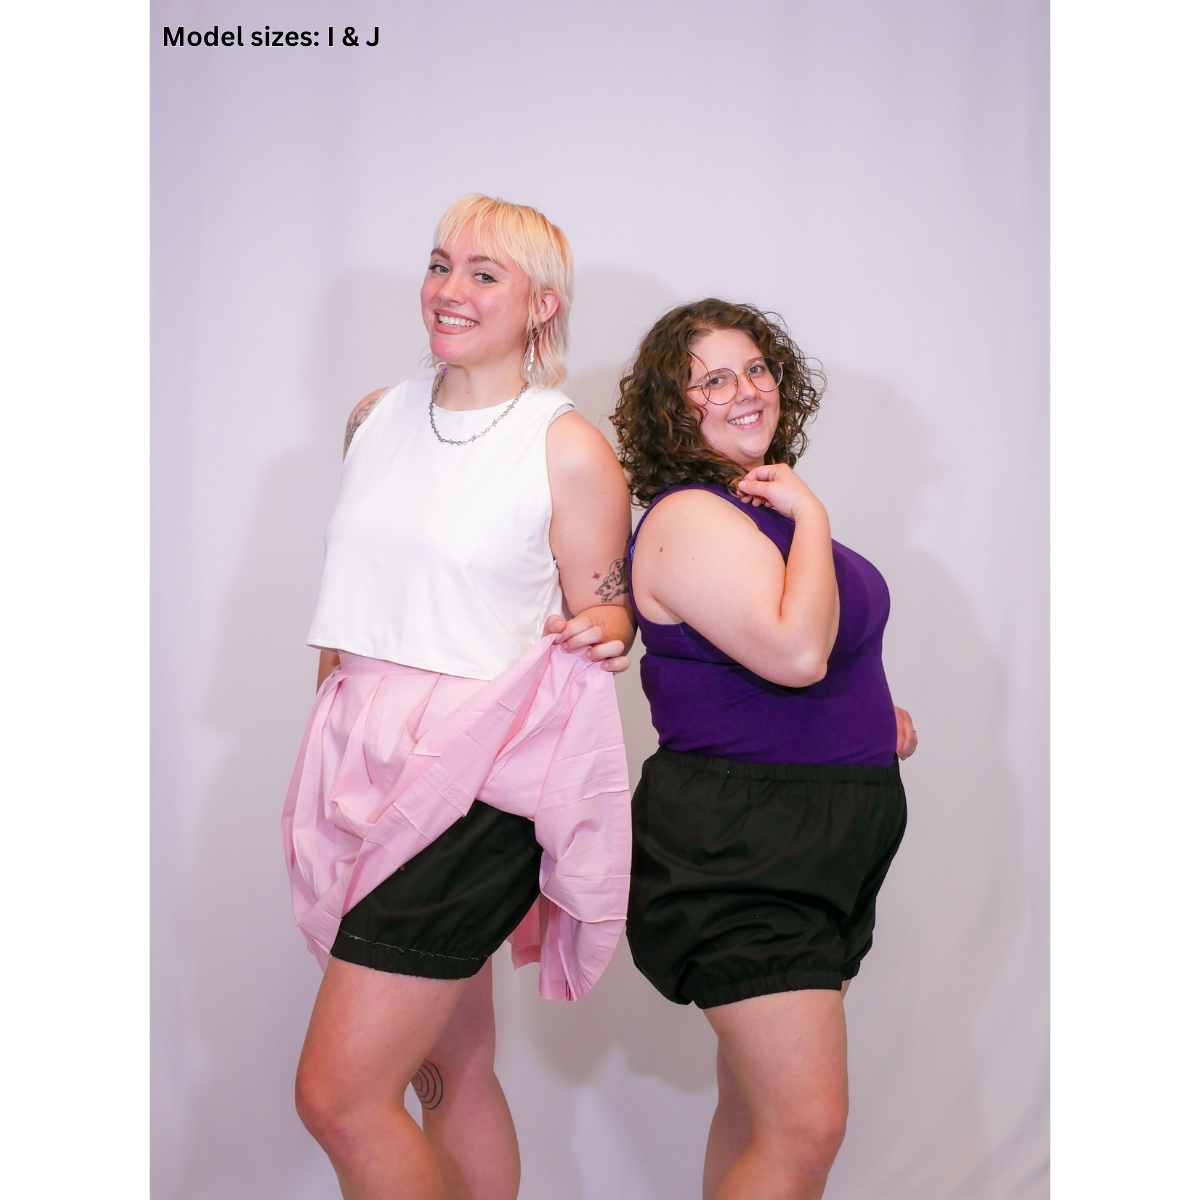 A photo of 2 women. One in a white sleeveless crop top (size H), a pink pleated skirt (size I), and short bloomers (size I). The other woman is in a purple tank top with short bloomers (Size J).